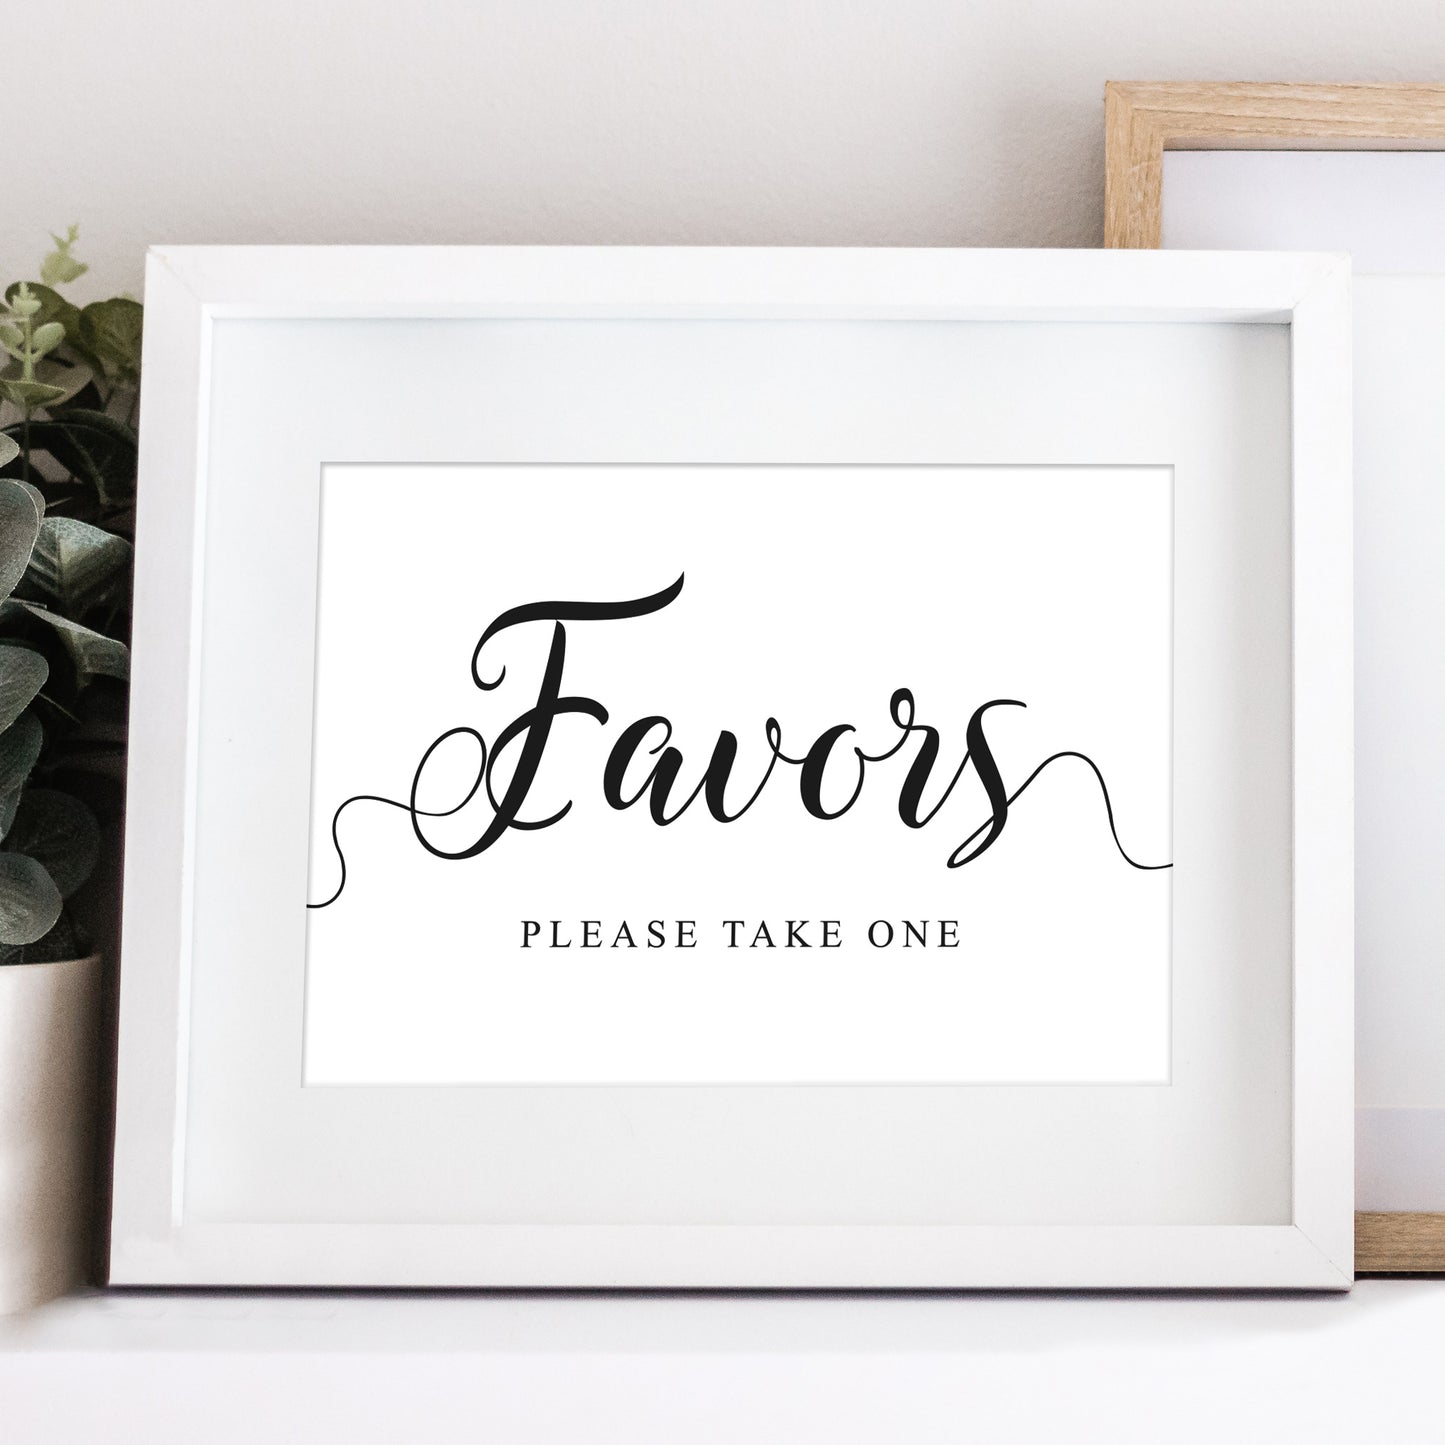 Wedding favors sign in a white frame on a table